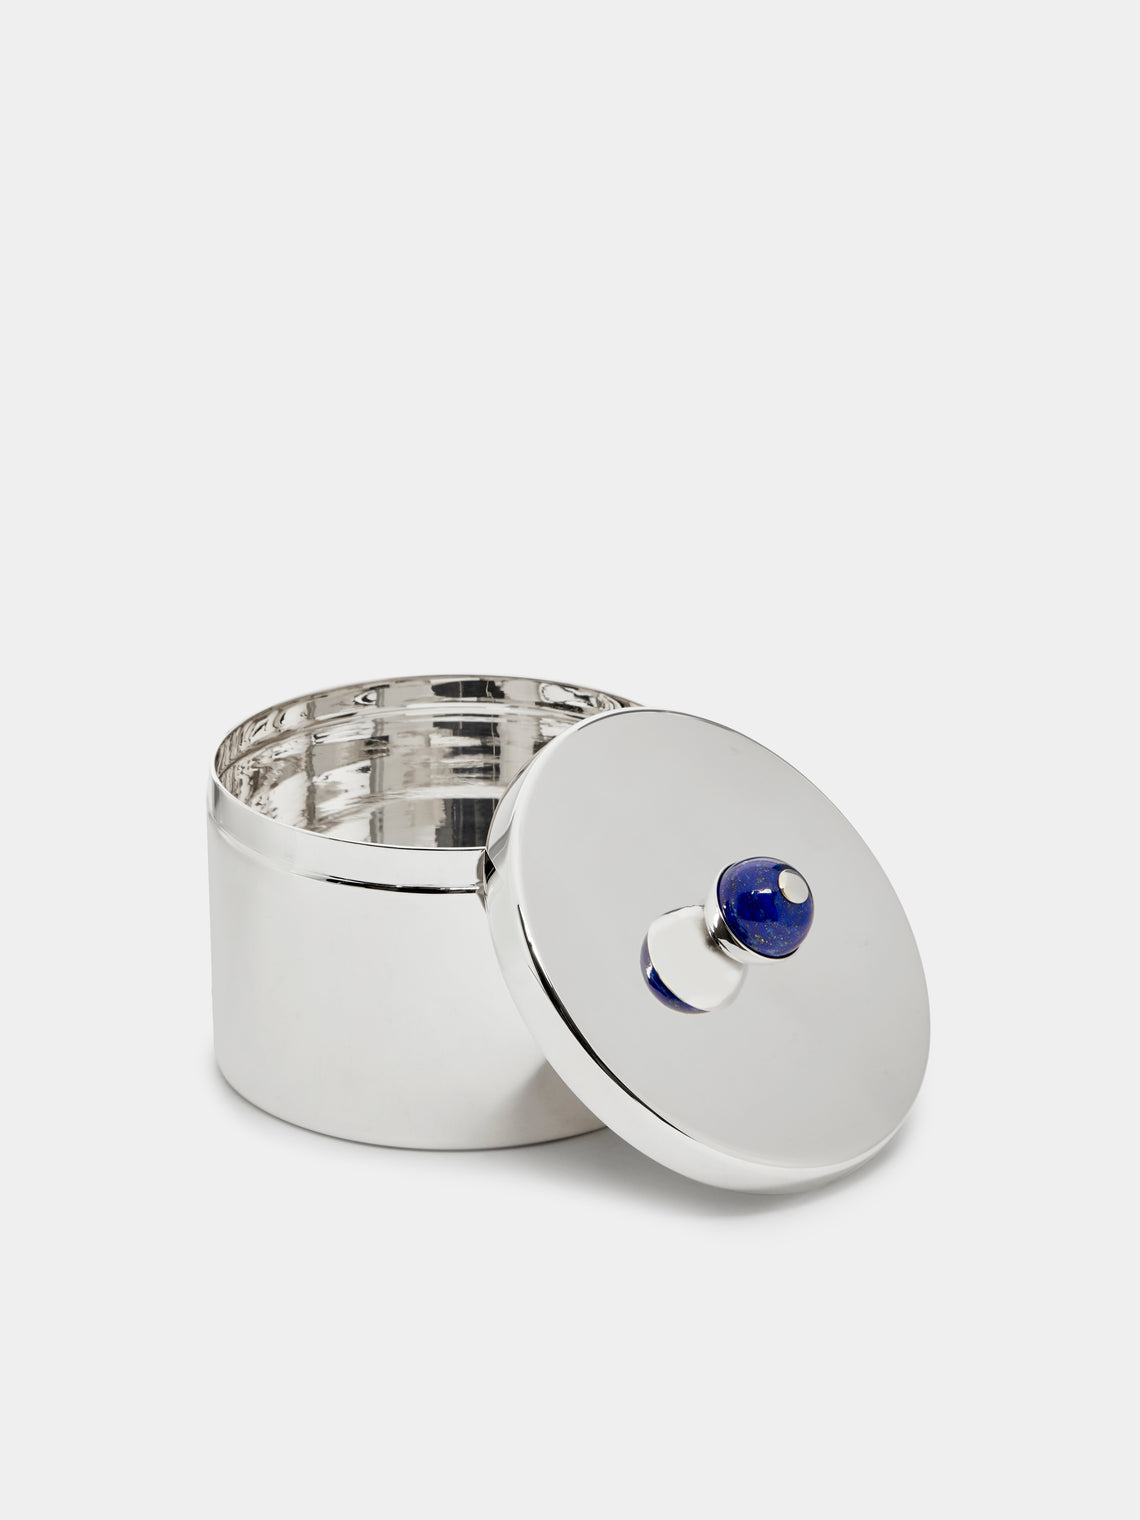 Wiener Silber Manufactur - Sterling Silver and Lapis Lazuli Box - Silver - ABASK